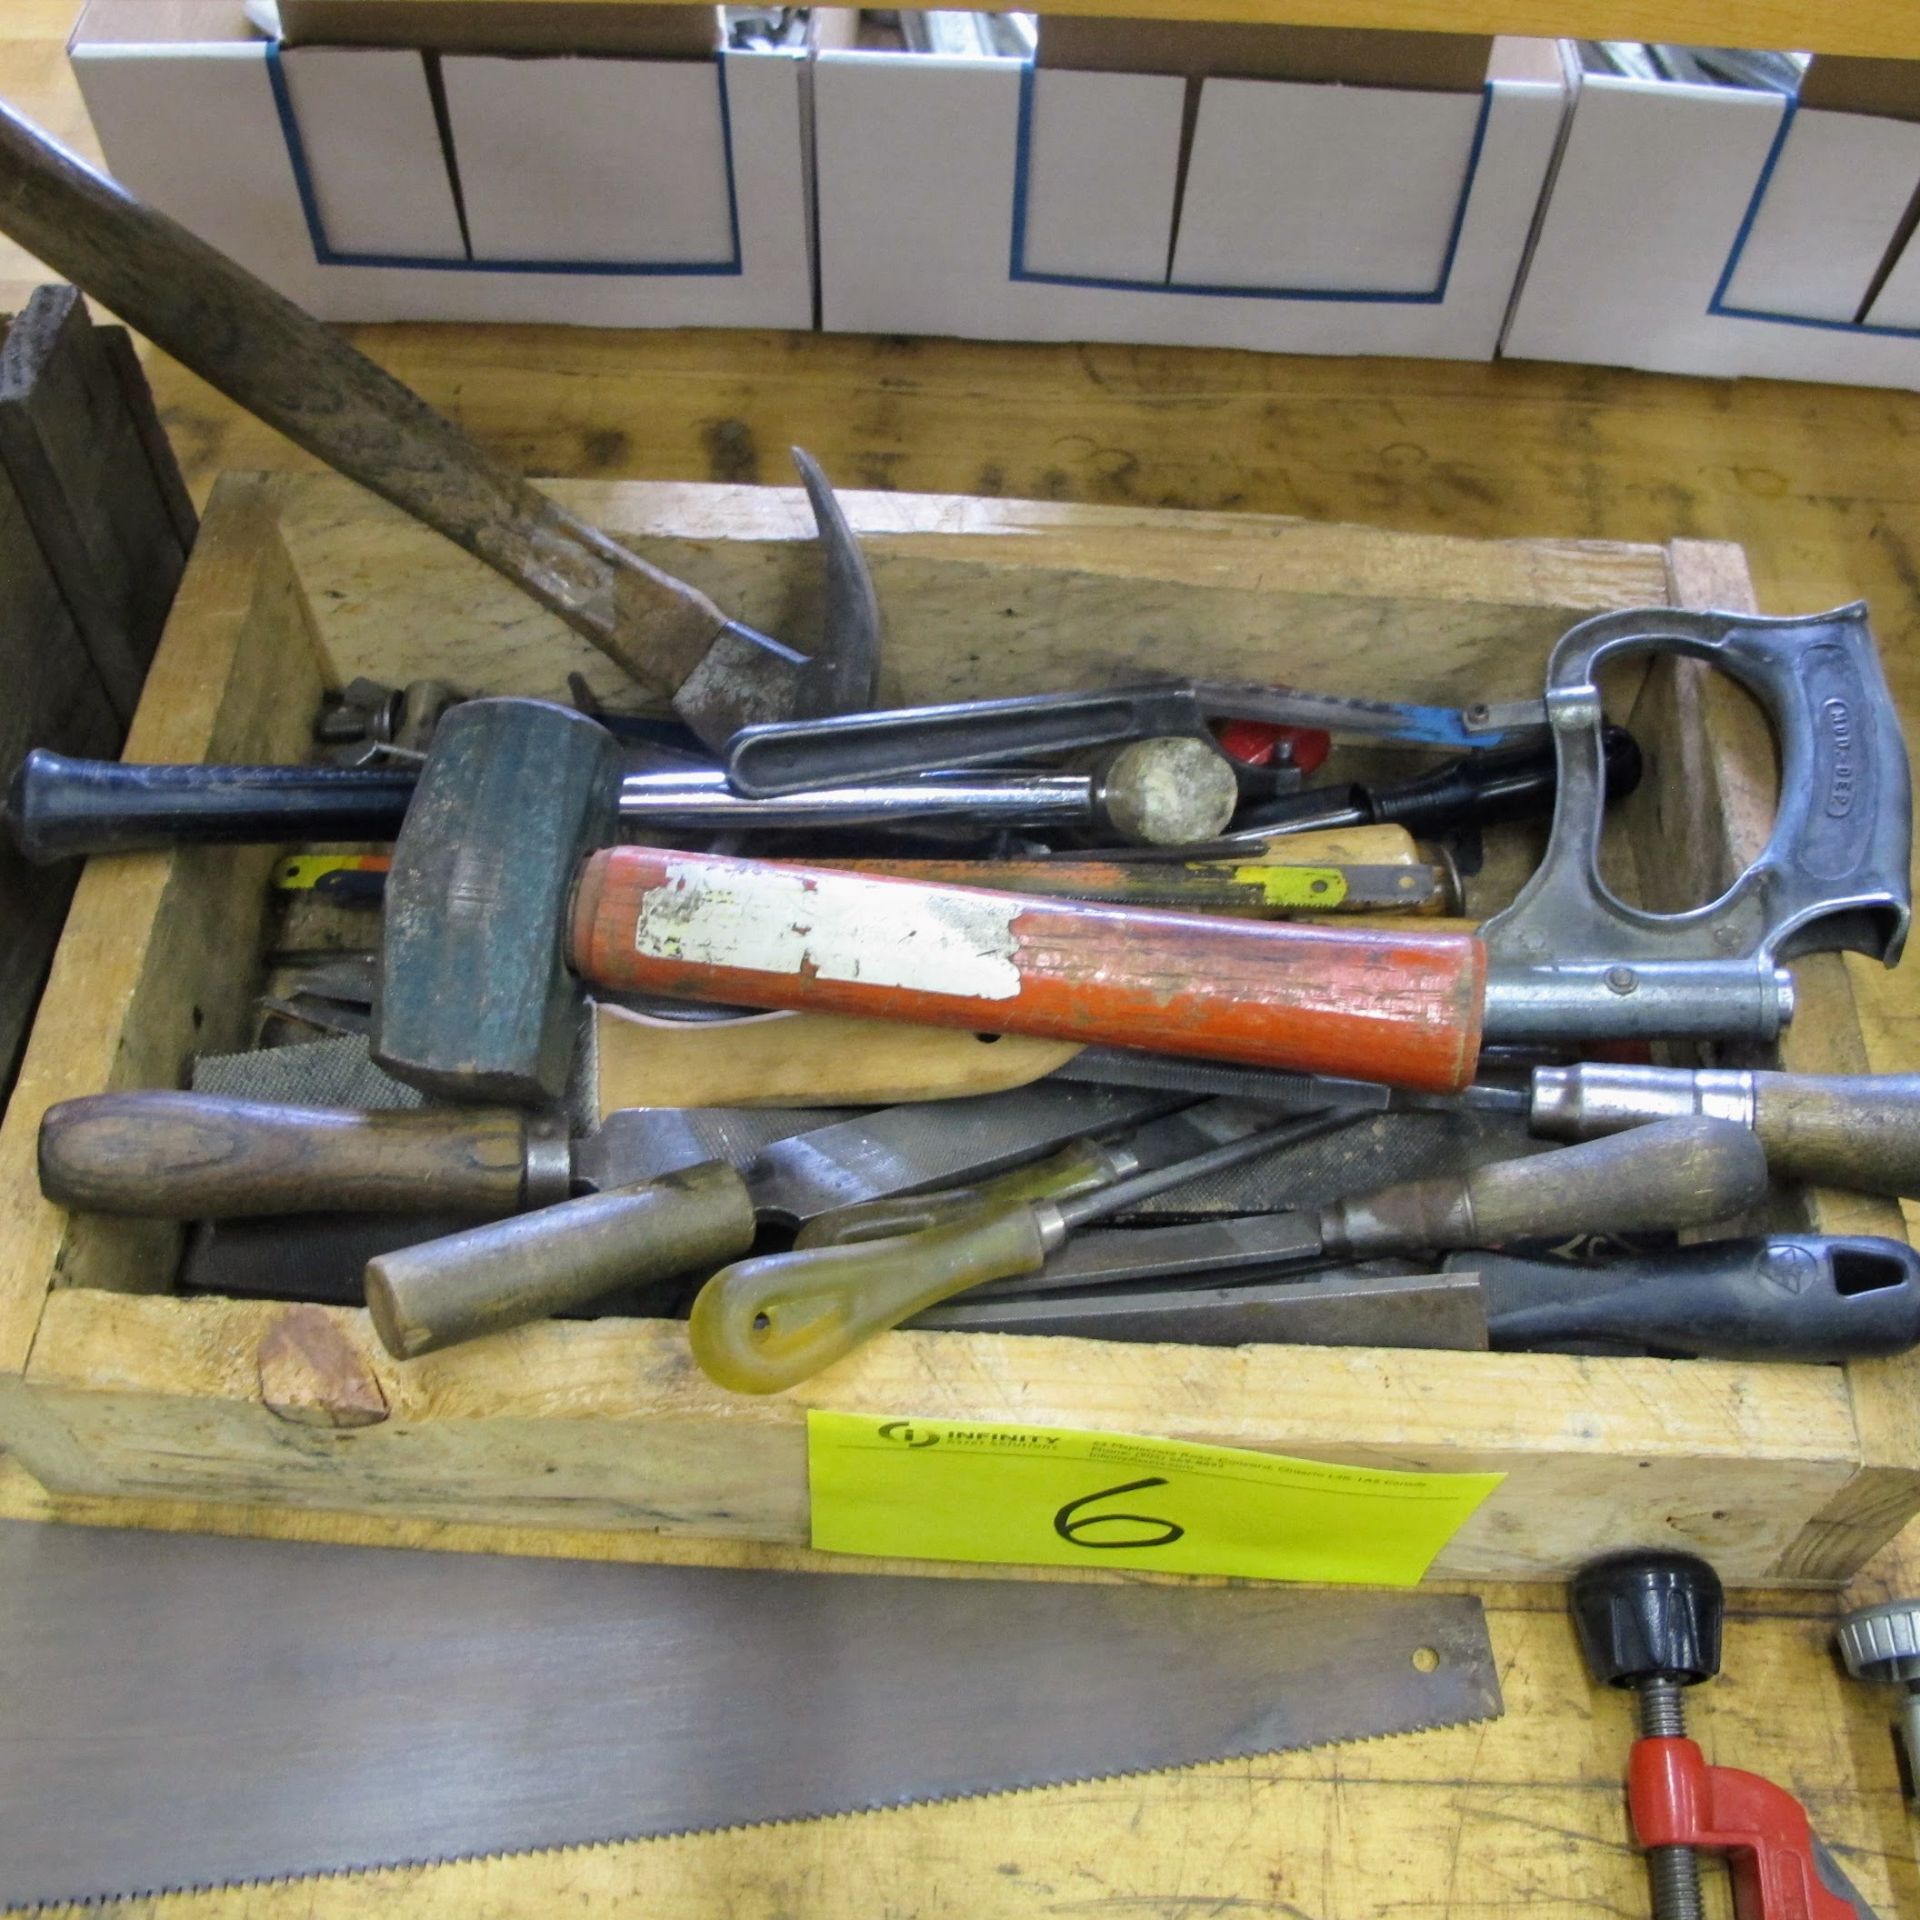 LOT OF 3 WOOD CRATES W/HAND TOOLS, PIPE CUTTERS, SAWS, PIPE WRENCH, HAMMERS, FILES, DRIVERS, ETC - Image 3 of 4